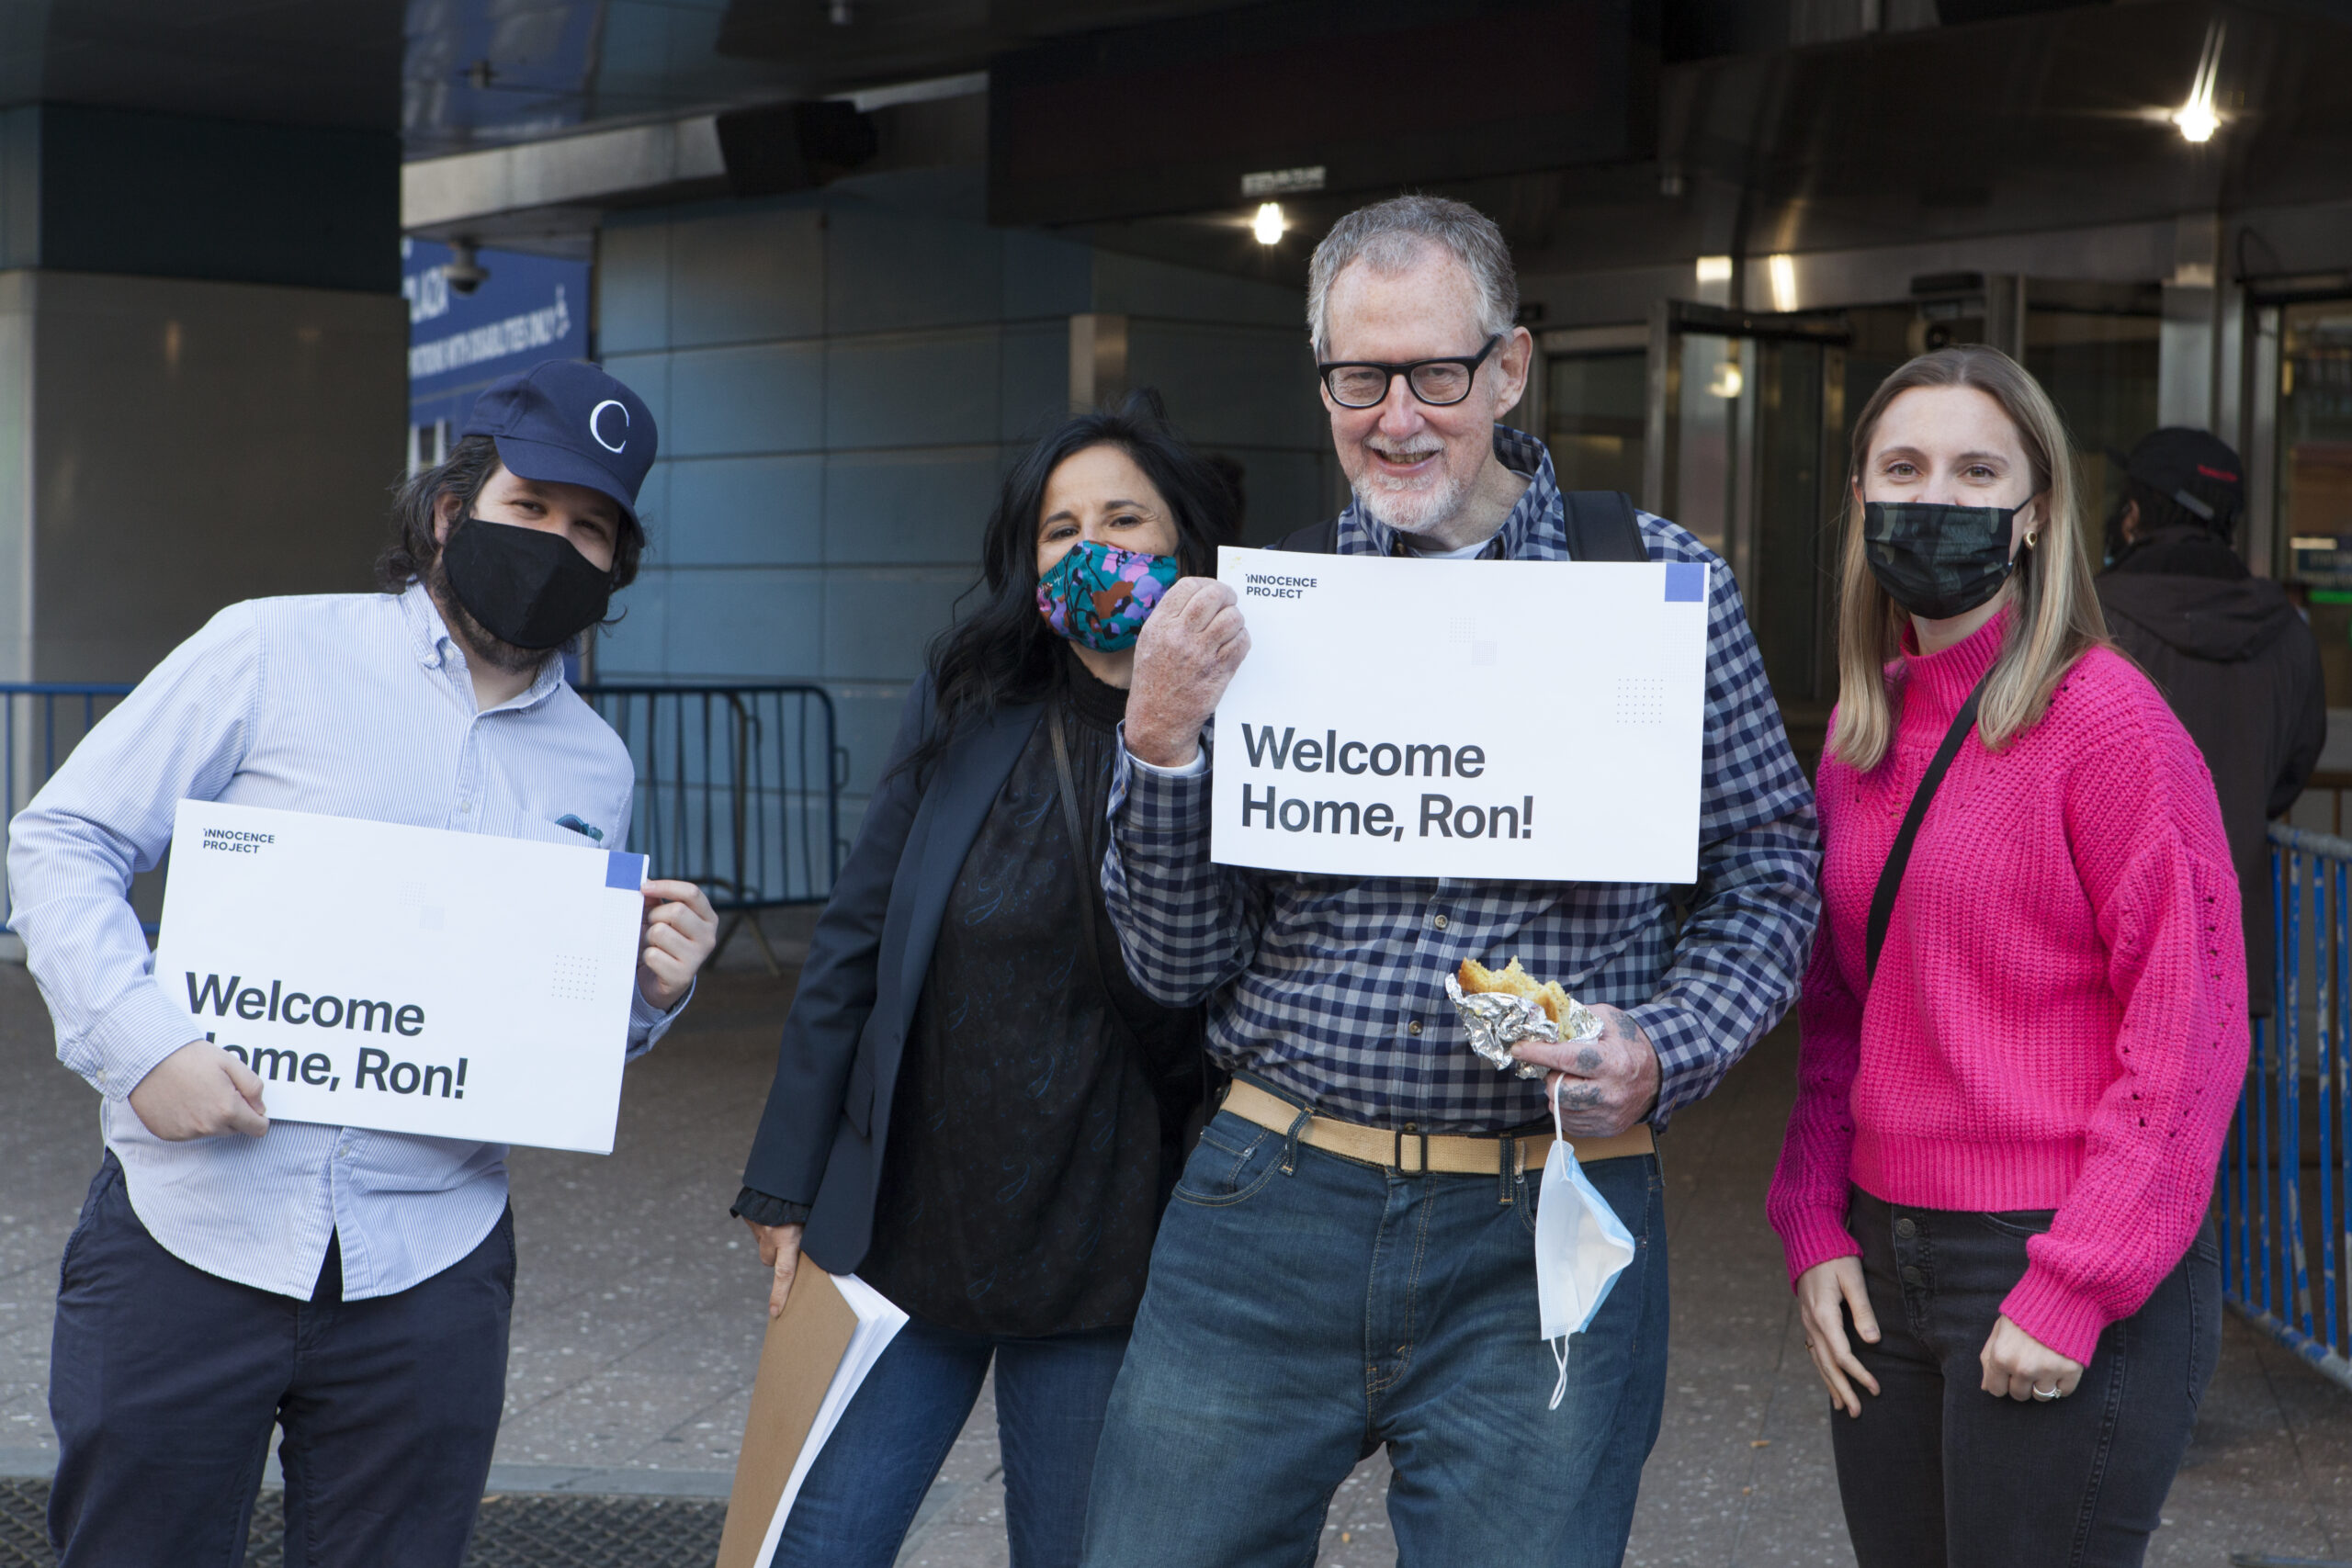 Ron Jacobsen (second from right) returns to his hometown of New York City for the first time in 30 years on Nov. 4, 2020. Mr. Jacobsen was released on bail on Nov. 3, after DNA evidence proved his innocence in 2019. His lawyer Vanessa Potkin (second from left) met him at Pennsylvania Station. (Image: Daniele Selby/Innocence Project)